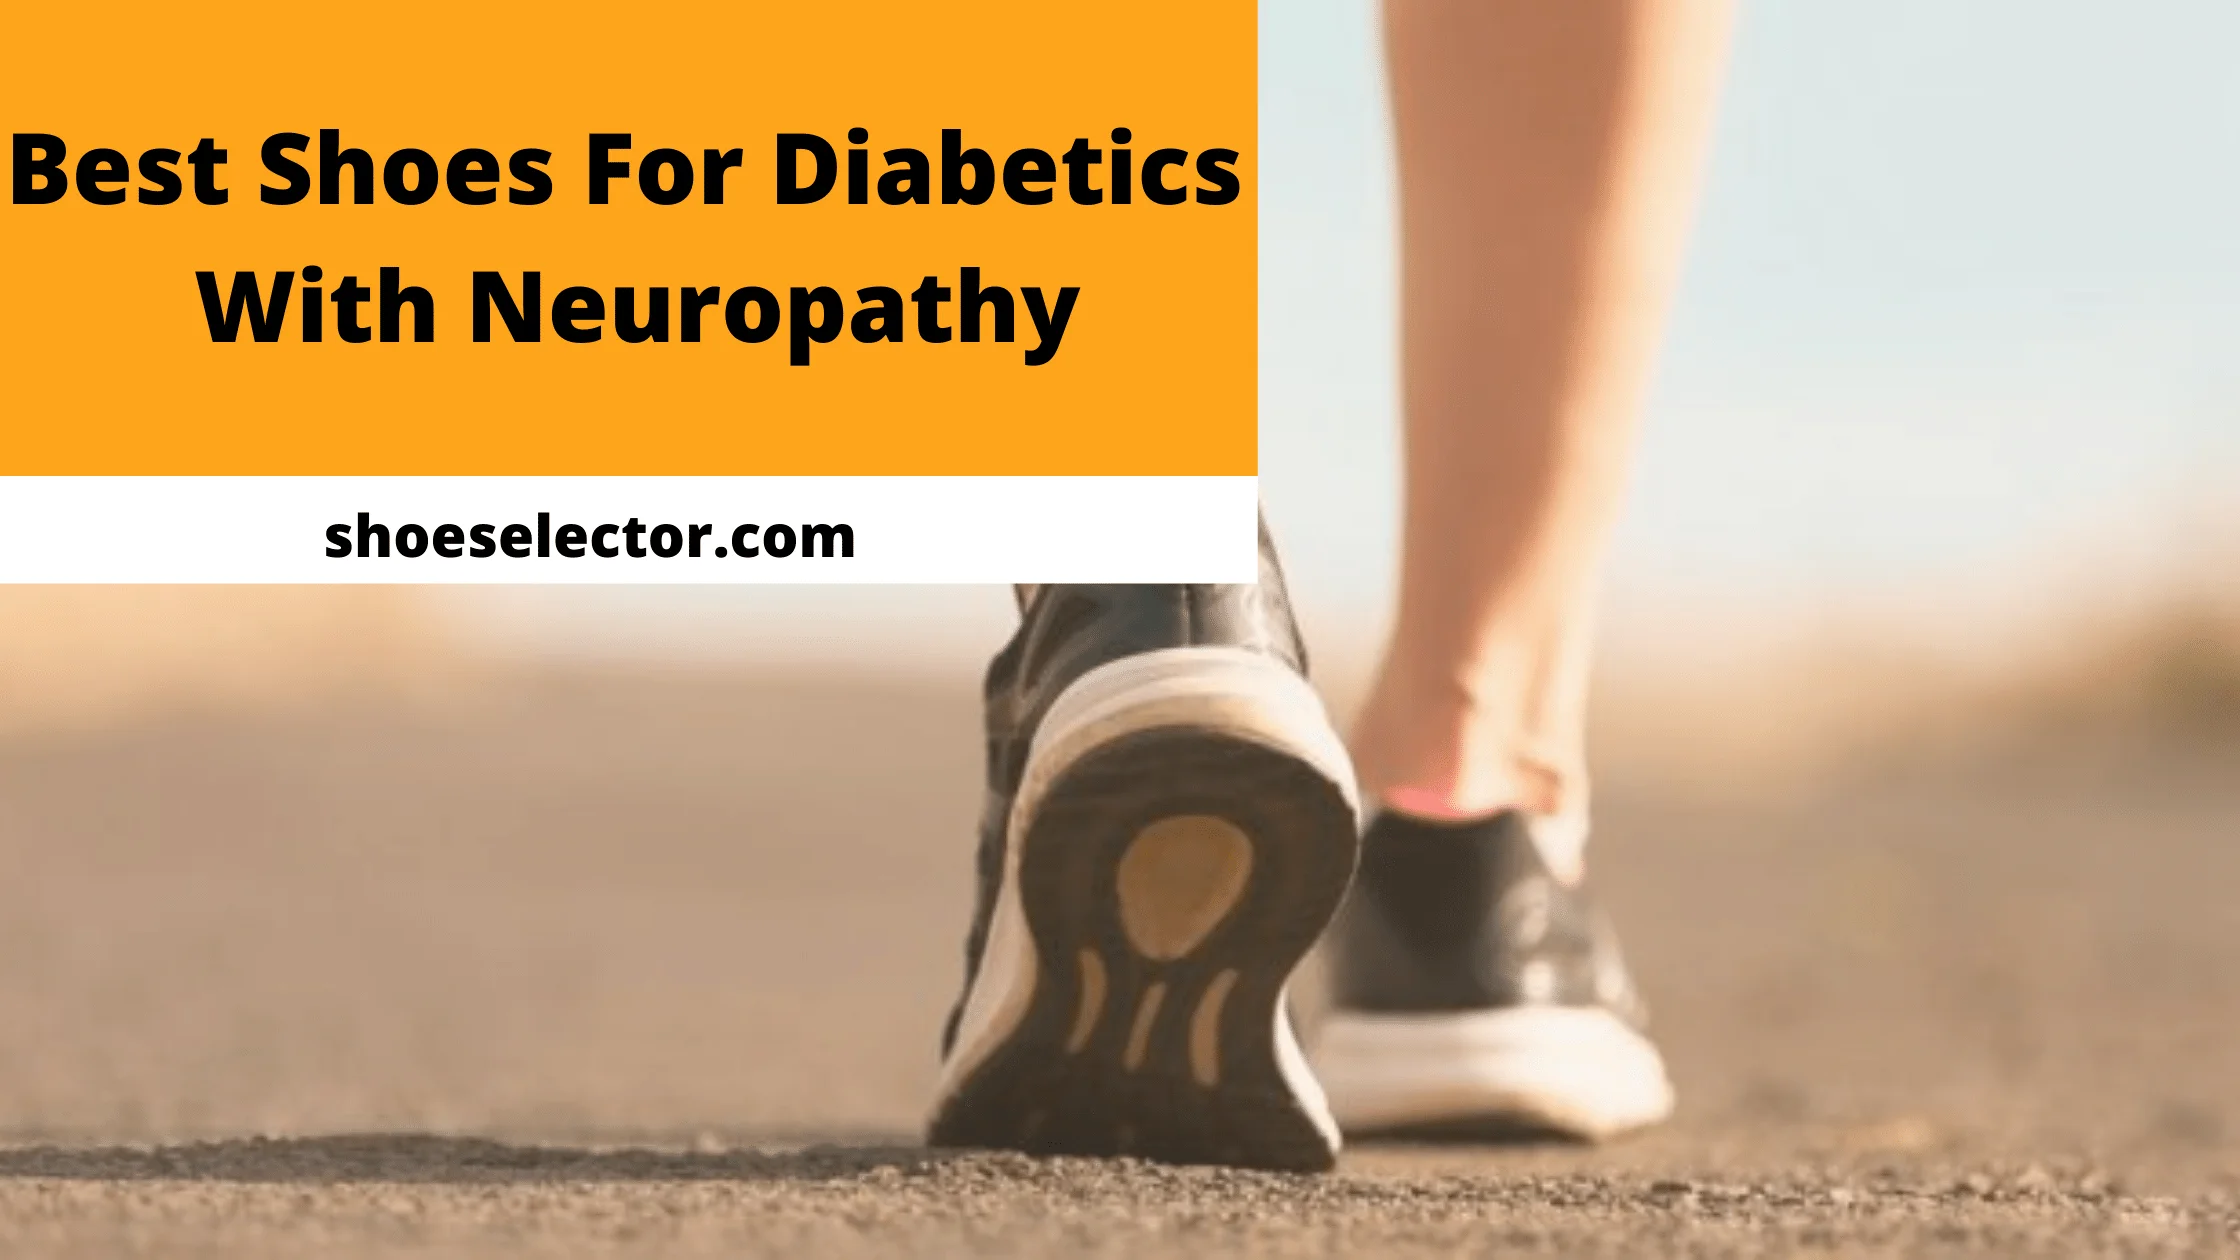 Best Shoes For Diabetics With Neuropathy With Shopping Tips